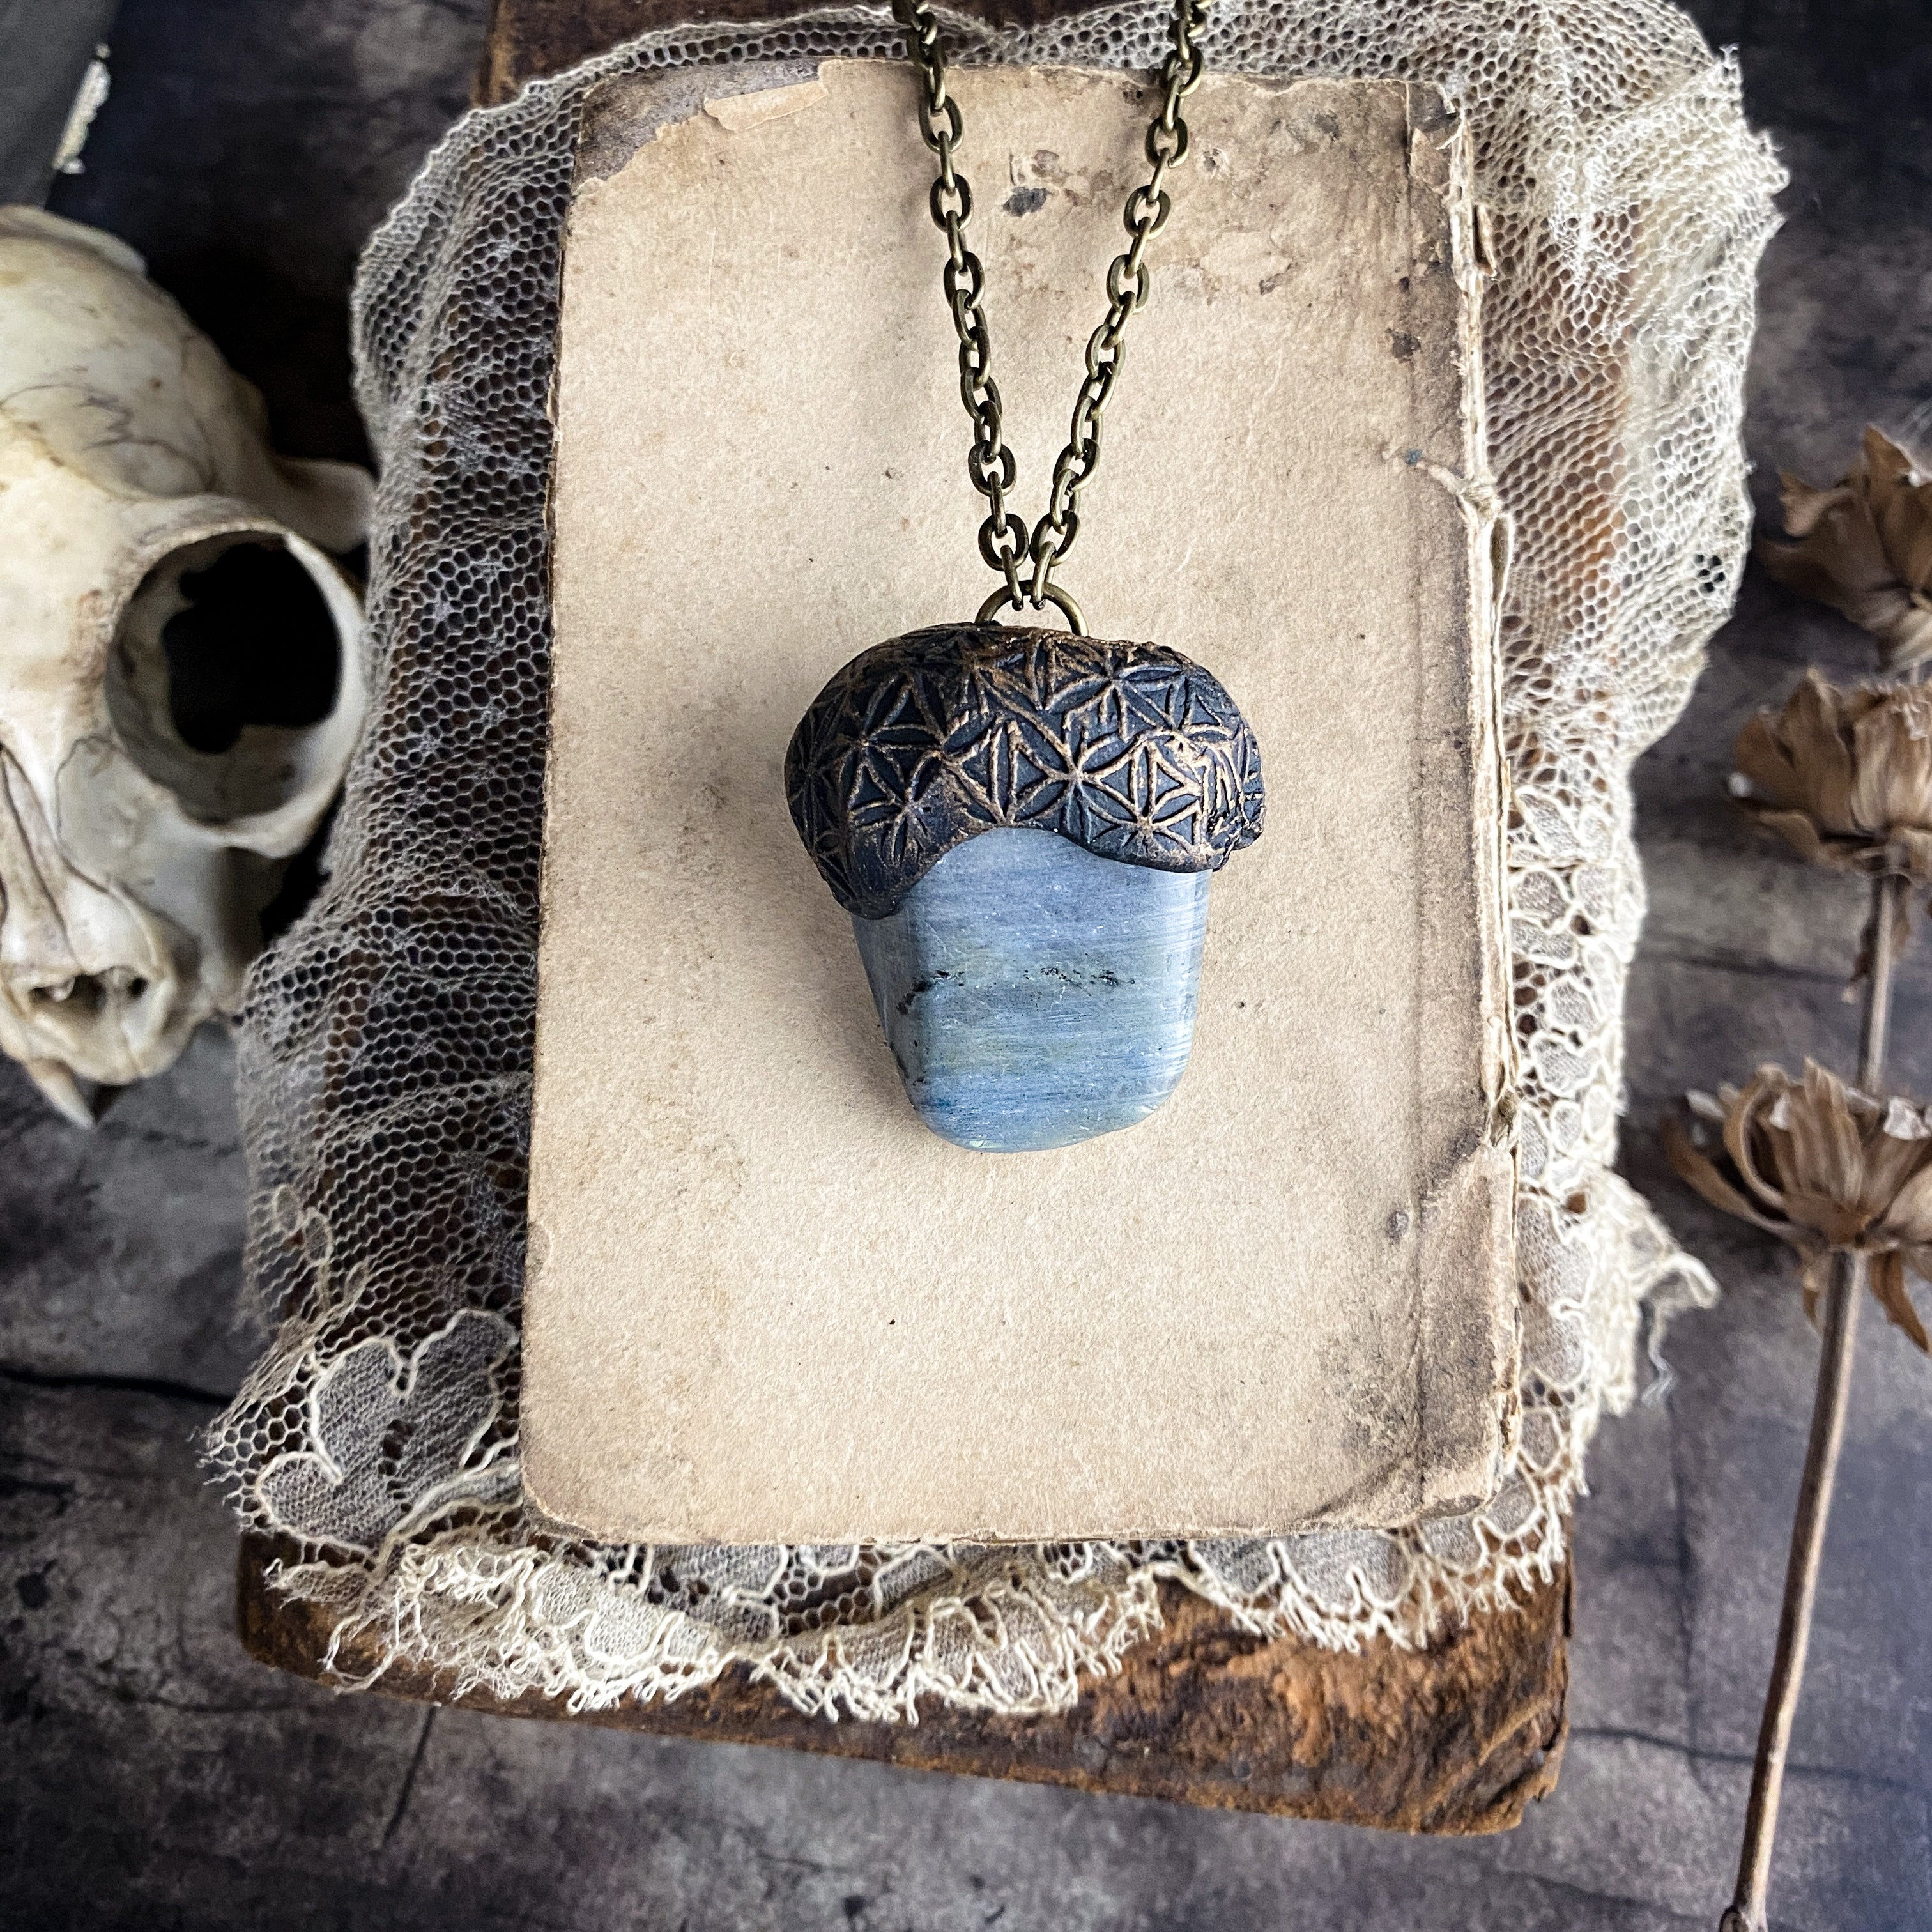 Labradorite Necklace - Handcrafted Clay and Stone Talisman